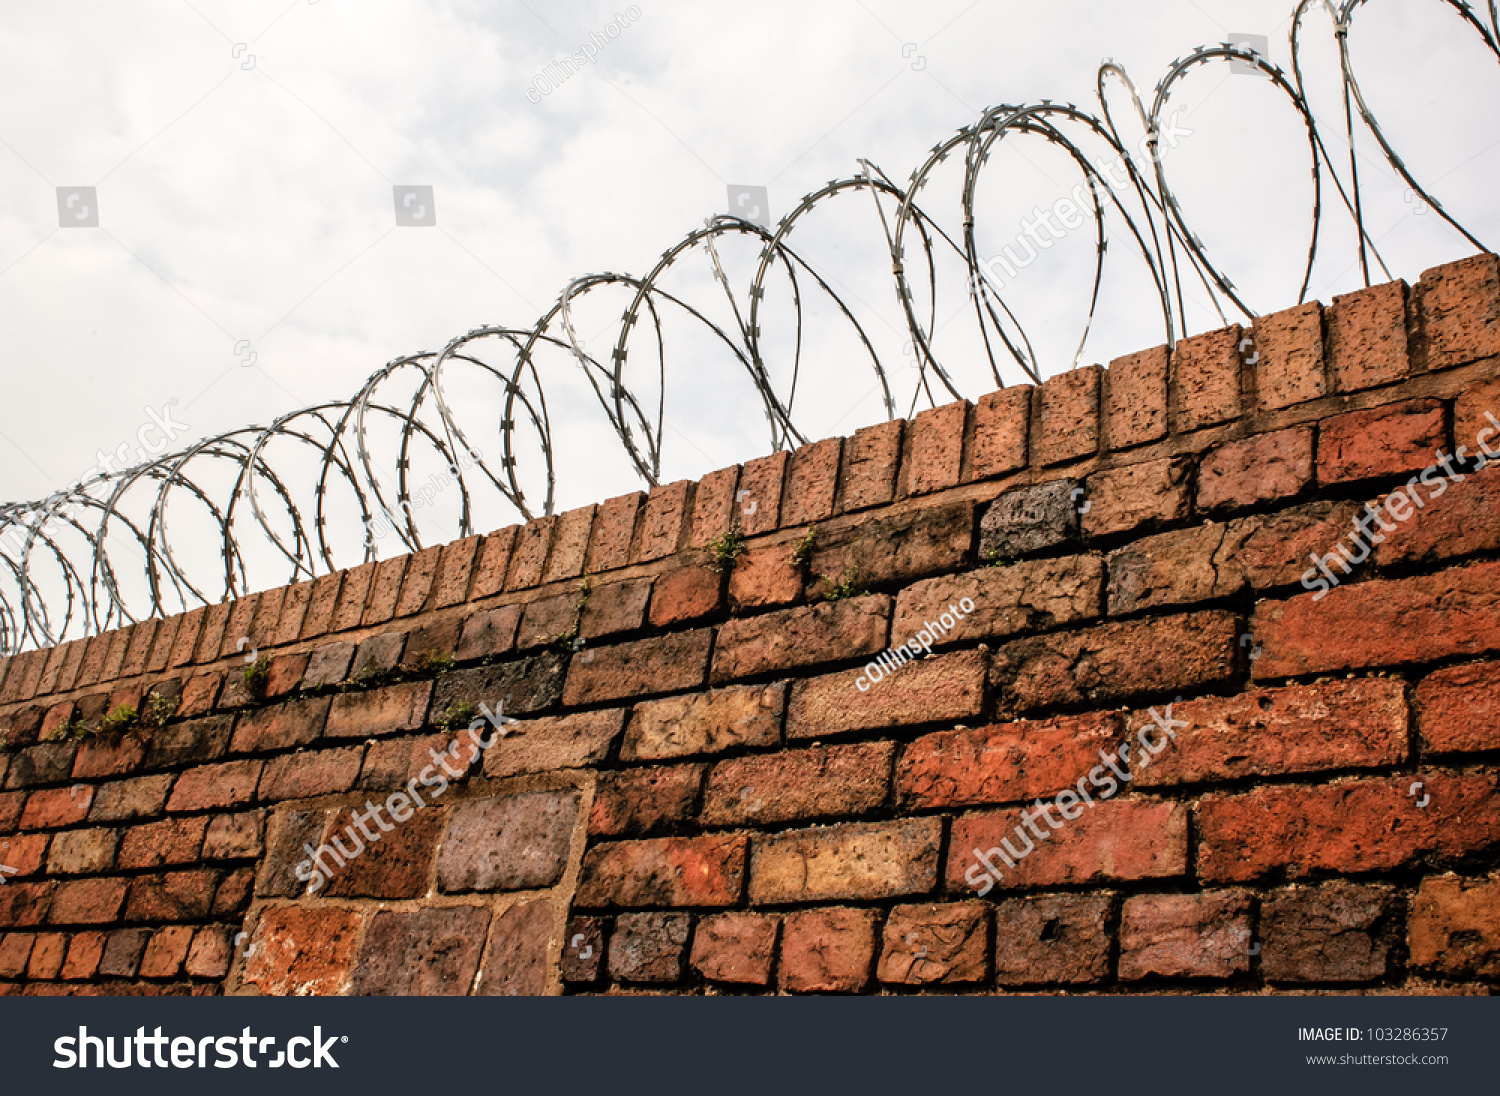 A Barbed Wire Coil Mounted On Top Of A Brick Wall